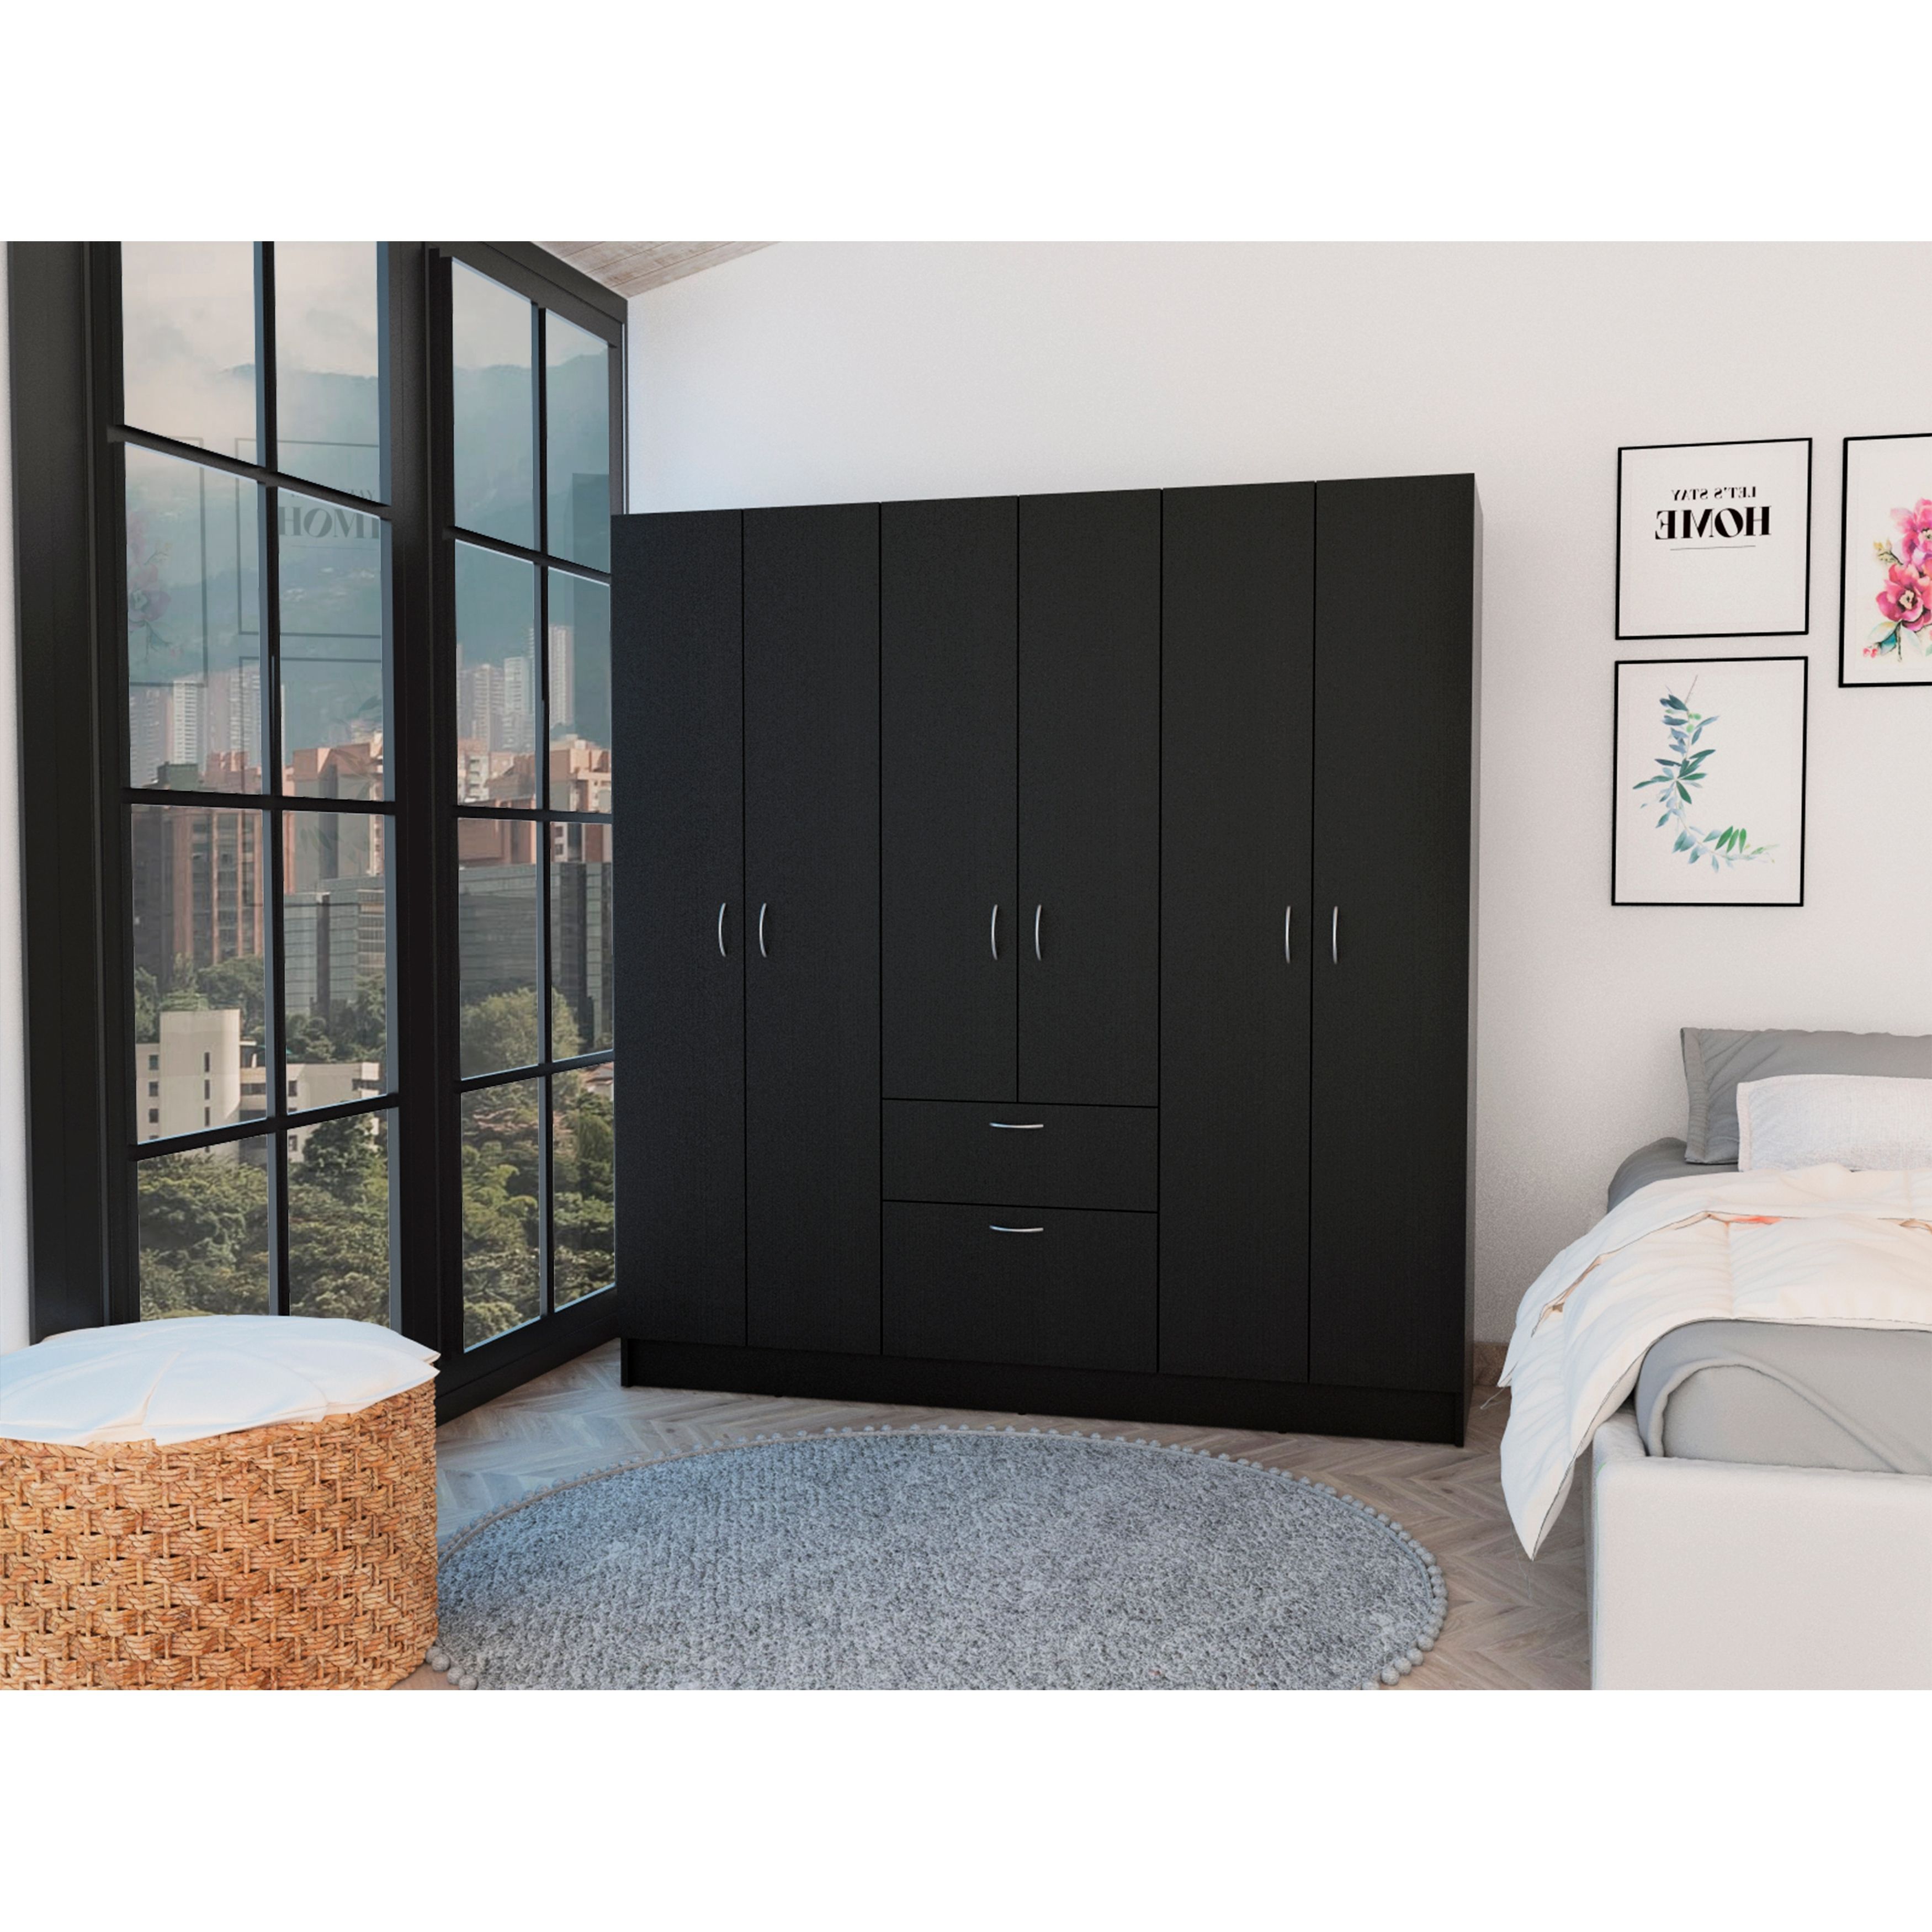 6 Door 1 Drawer Wardrobe Closet With Drawers & Shelves, Armoire Wardrobe  Closet With Hanging Rod, Bedroom Armoire Closet – Bed Bath & Beyond –  37828084 Pertaining To 6 Door Wardrobes Bedroom Furniture (Gallery 16 of 20)